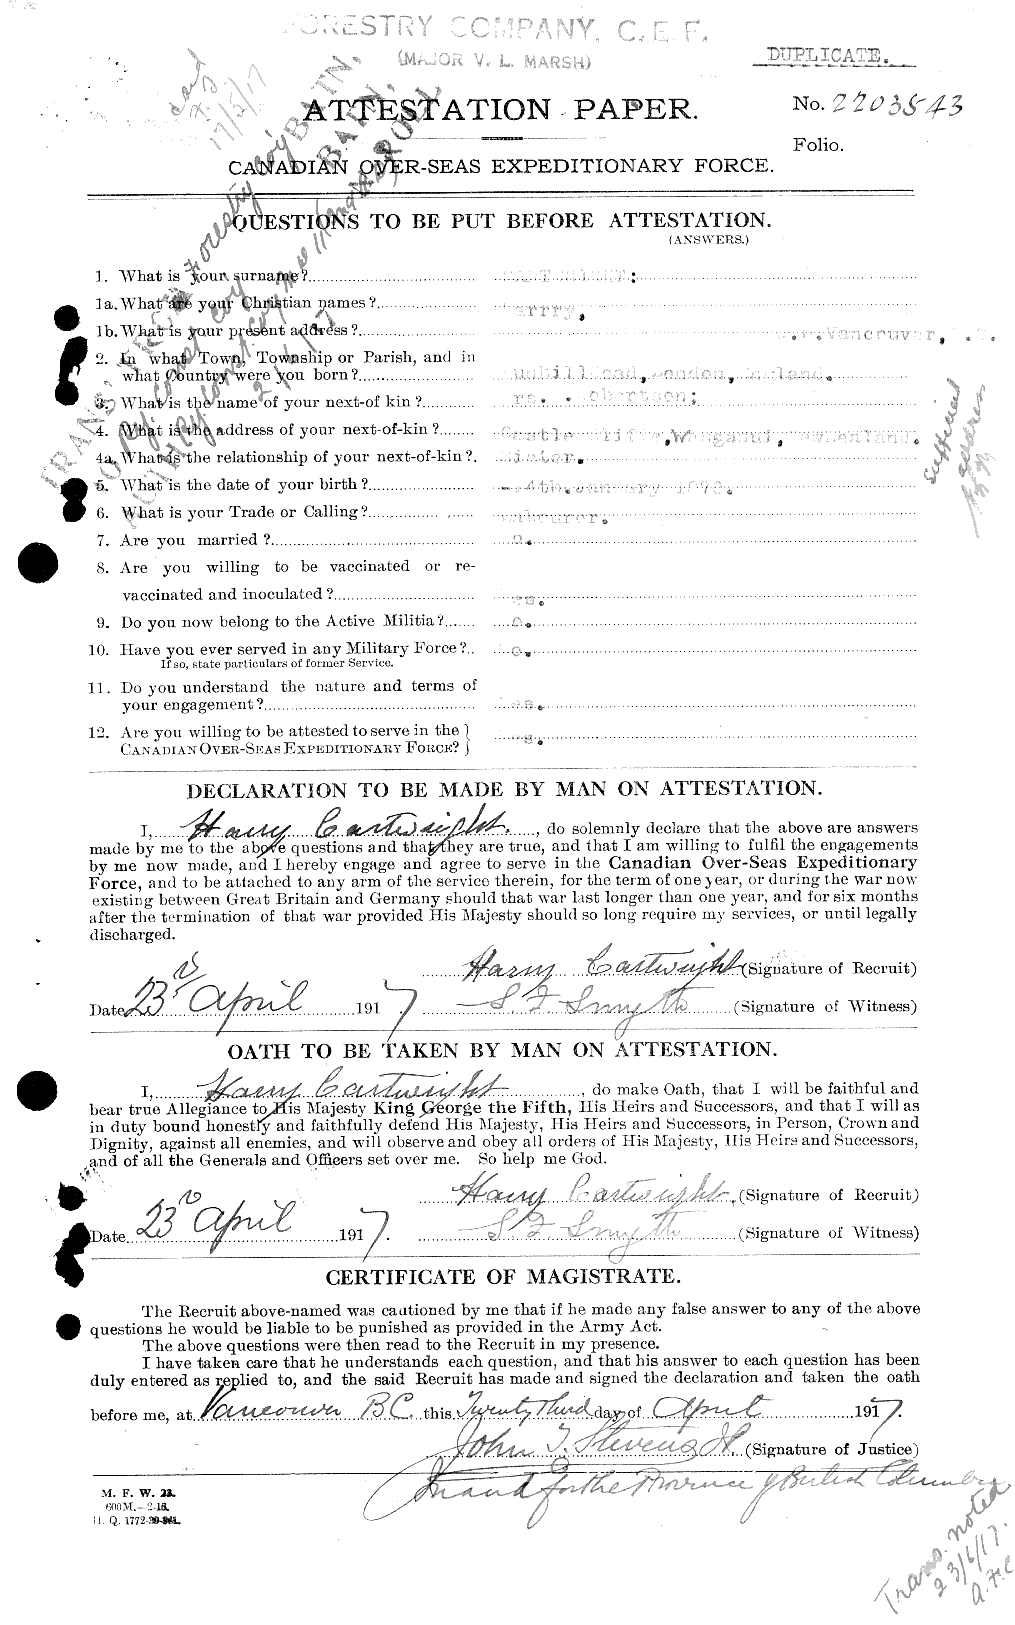 Personnel Records of the First World War - CEF 011586a